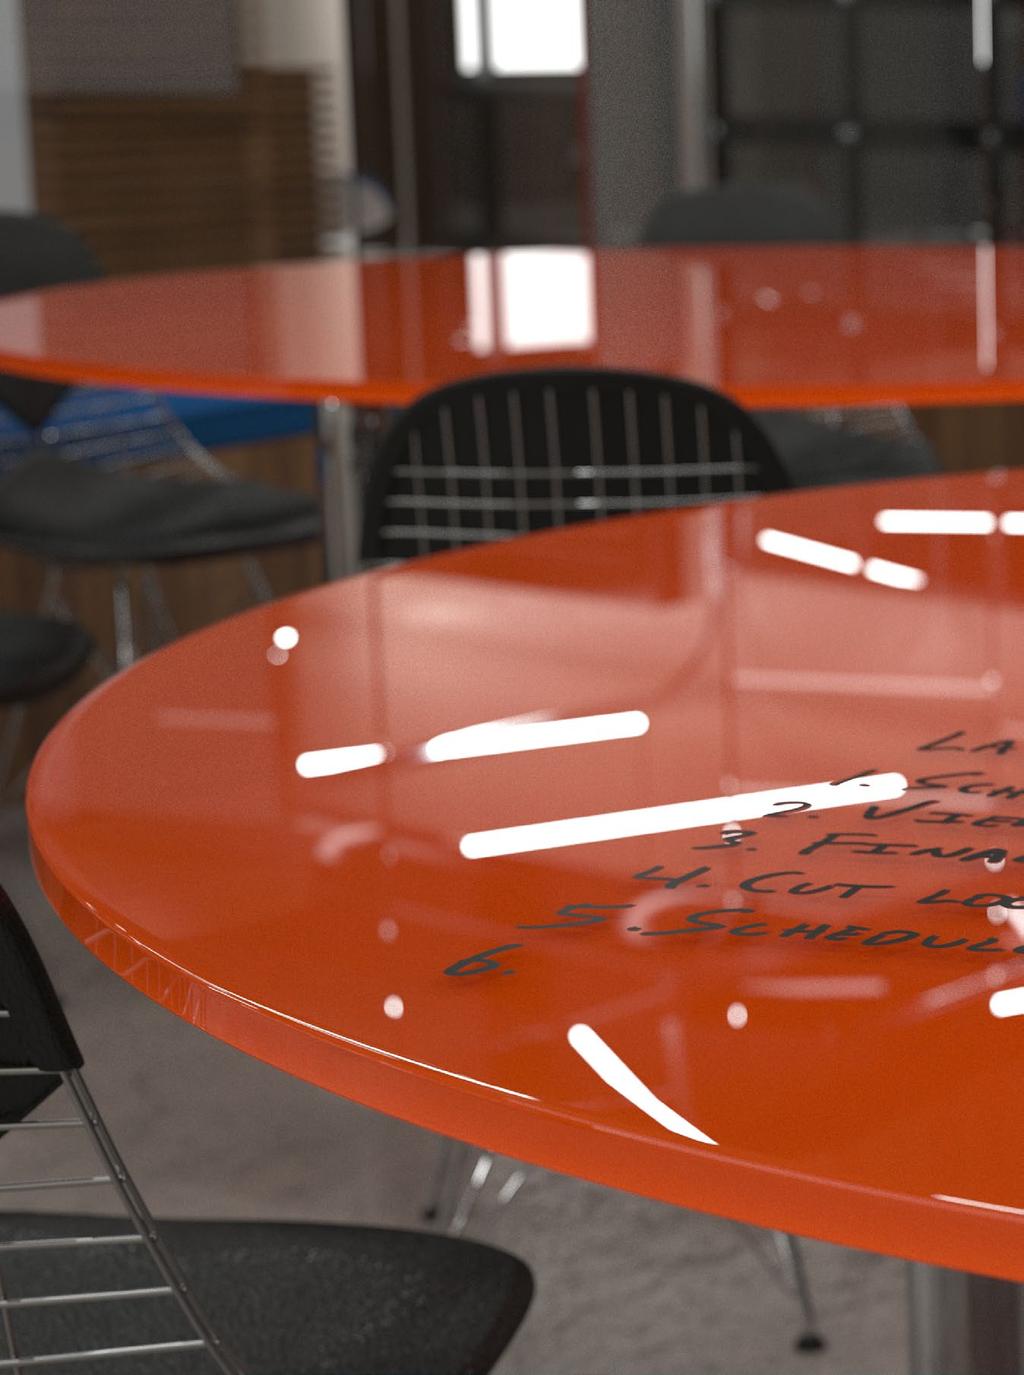 ELEGANCE WITH A PURPOSE The versatility of a writing surface and the beauty of colorful Clarus glass all in a tabletop.